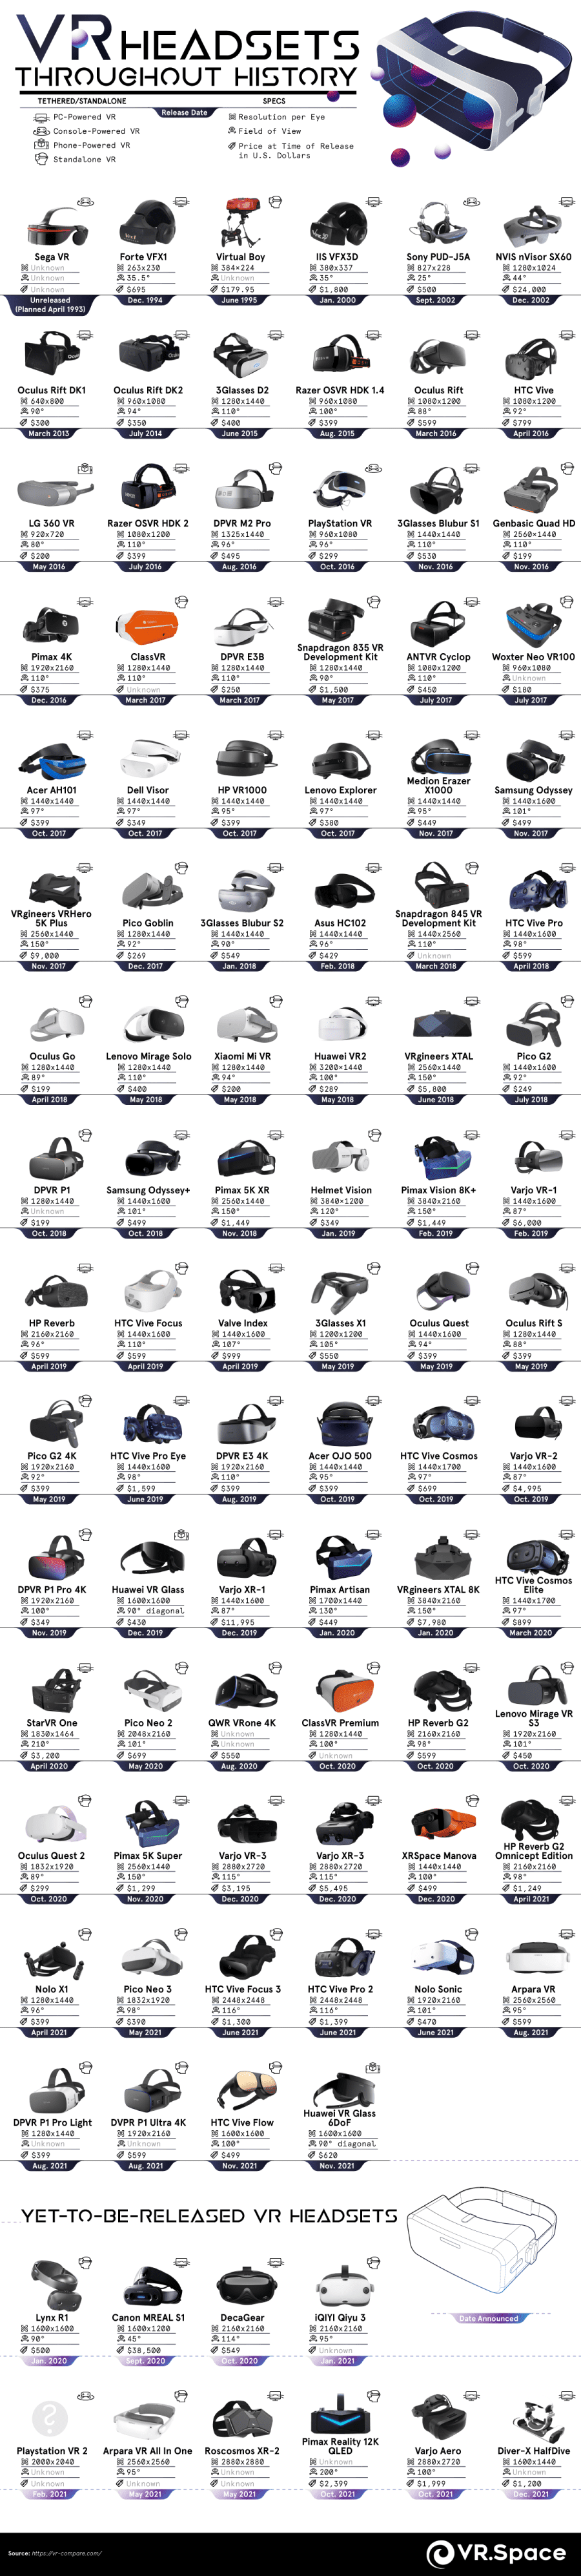 vr-headsets-throughout-history-Infographic